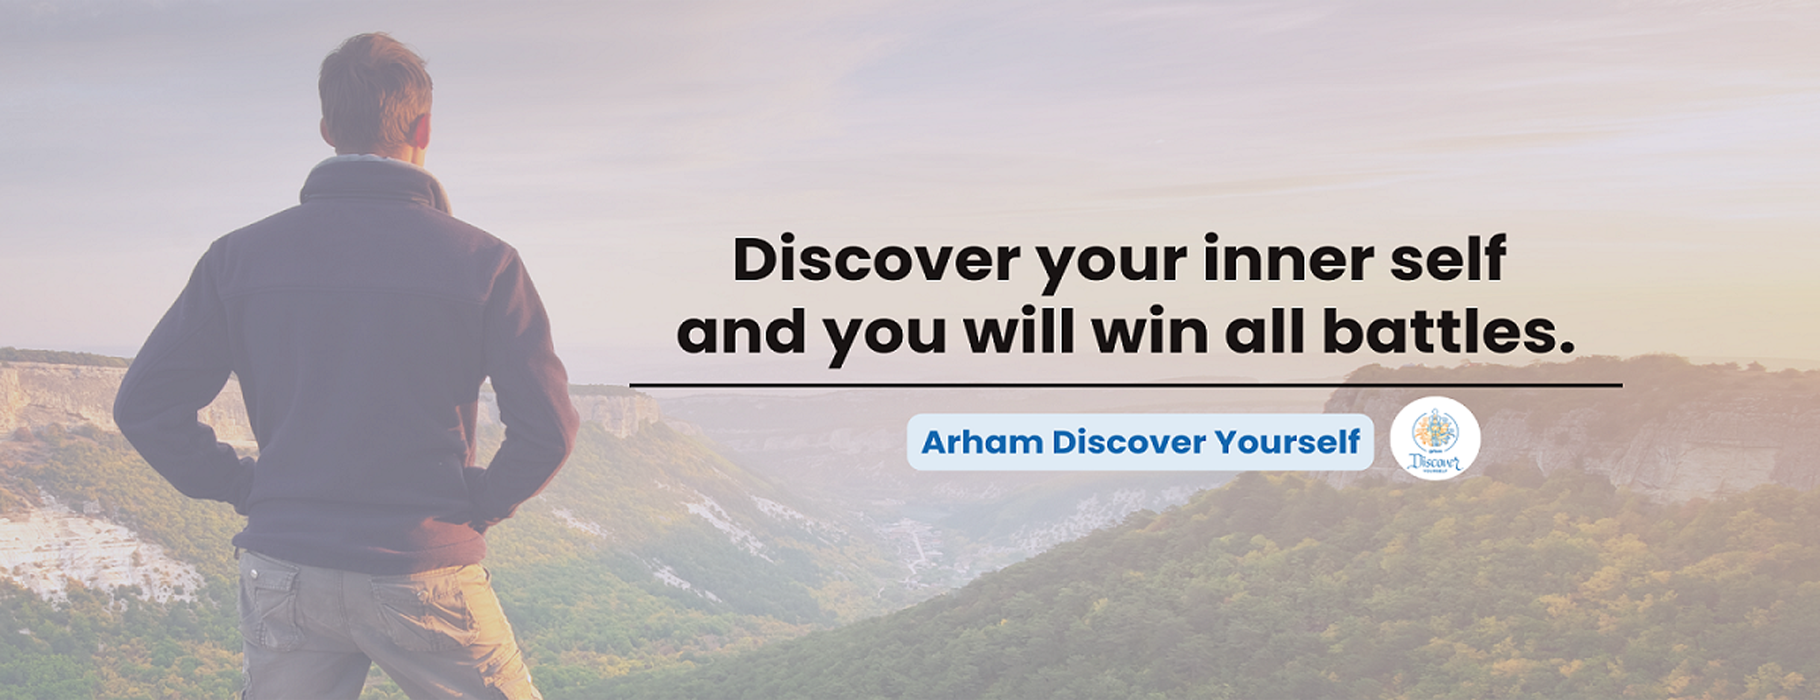 Arham Discover Yours